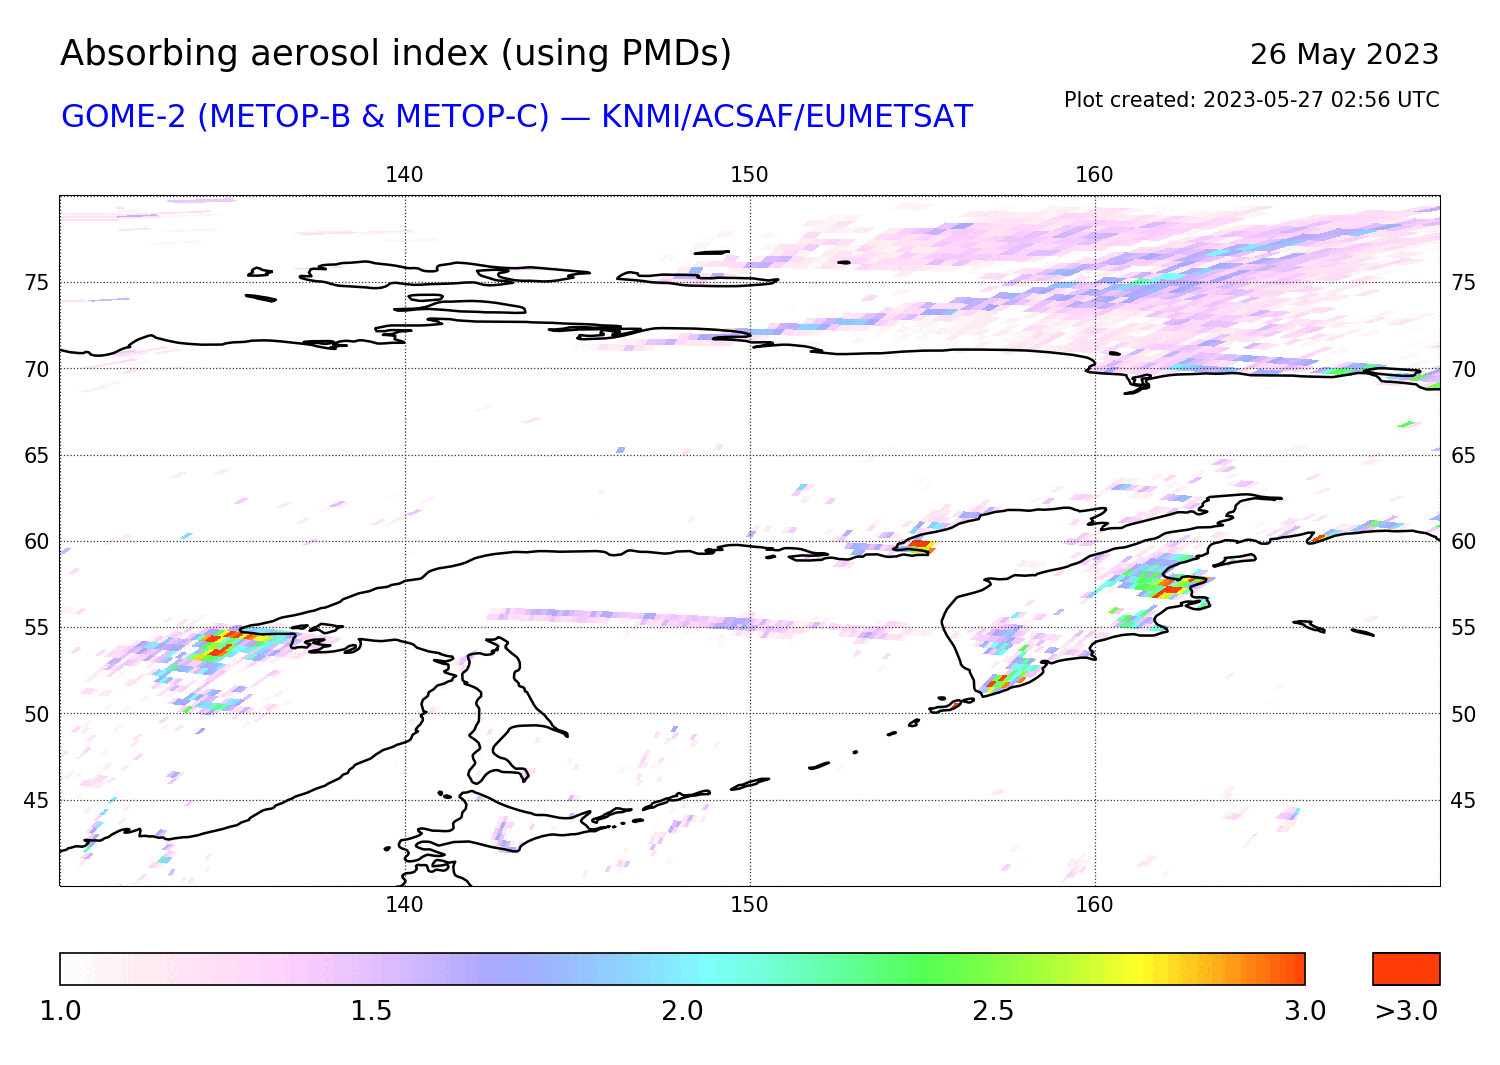 GOME-2 - Absorbing aerosol index of 26 May 2023